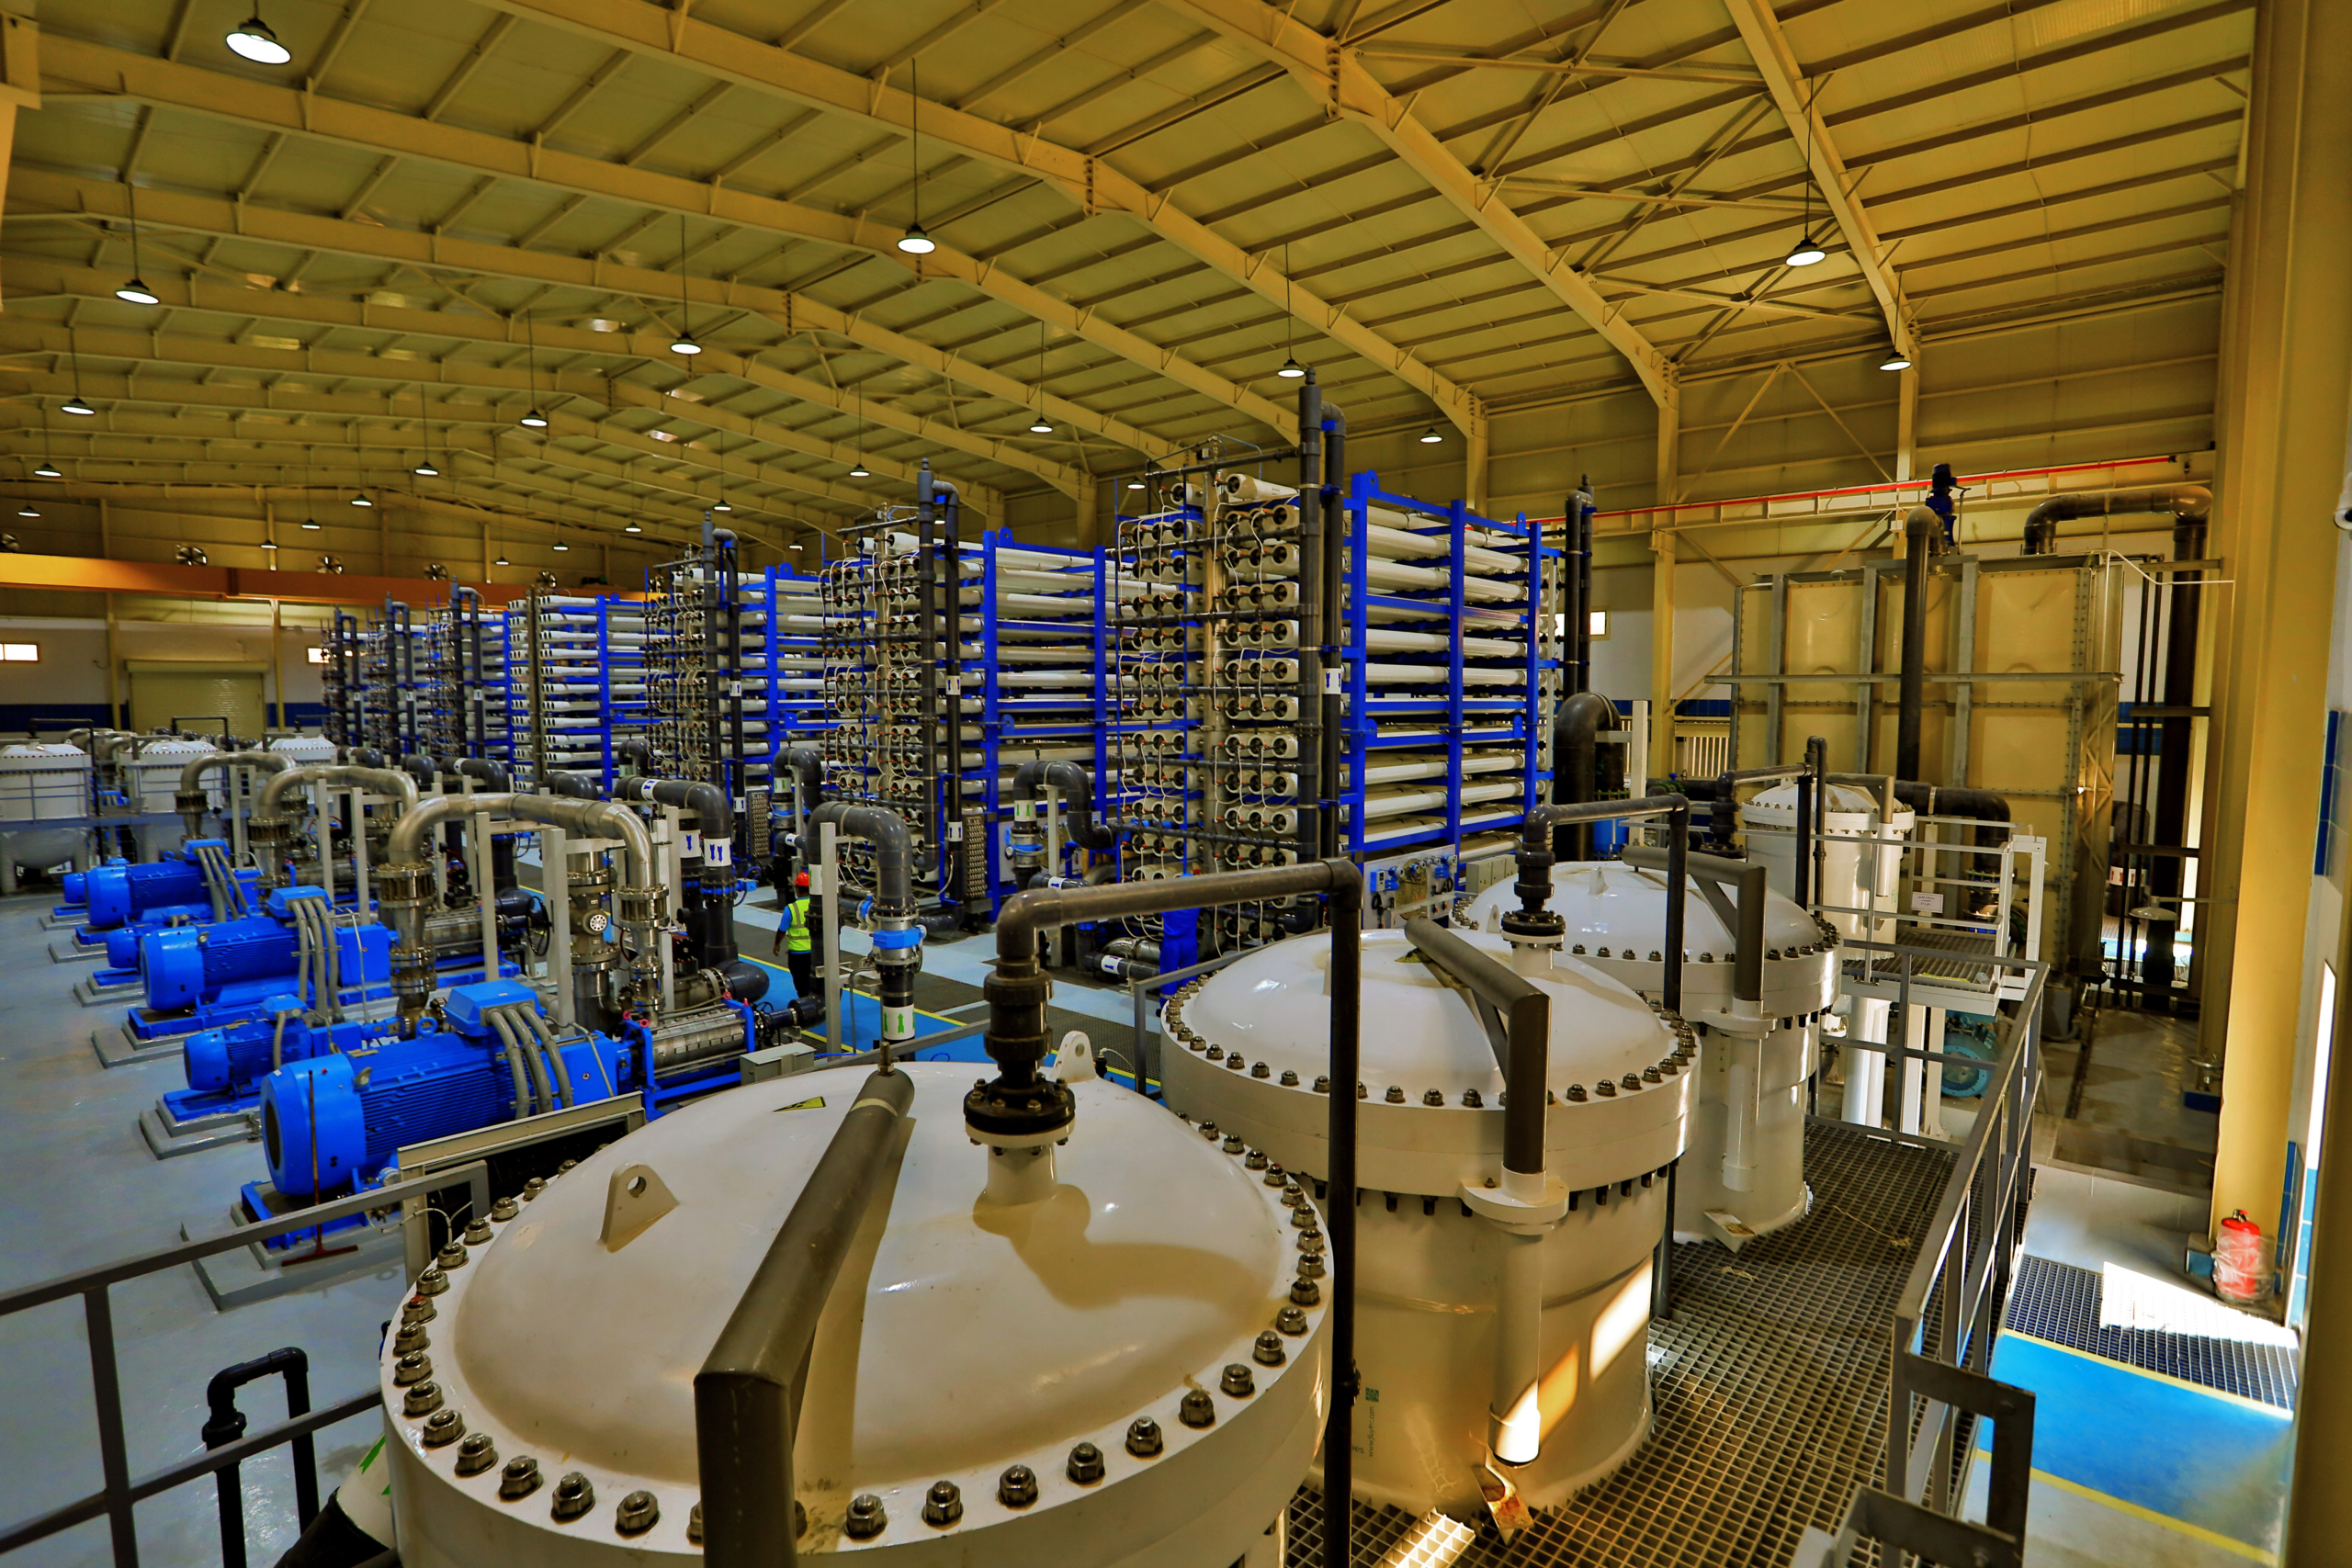 Metito: International acclaim for Desalination Initiatives to Advance Water Security